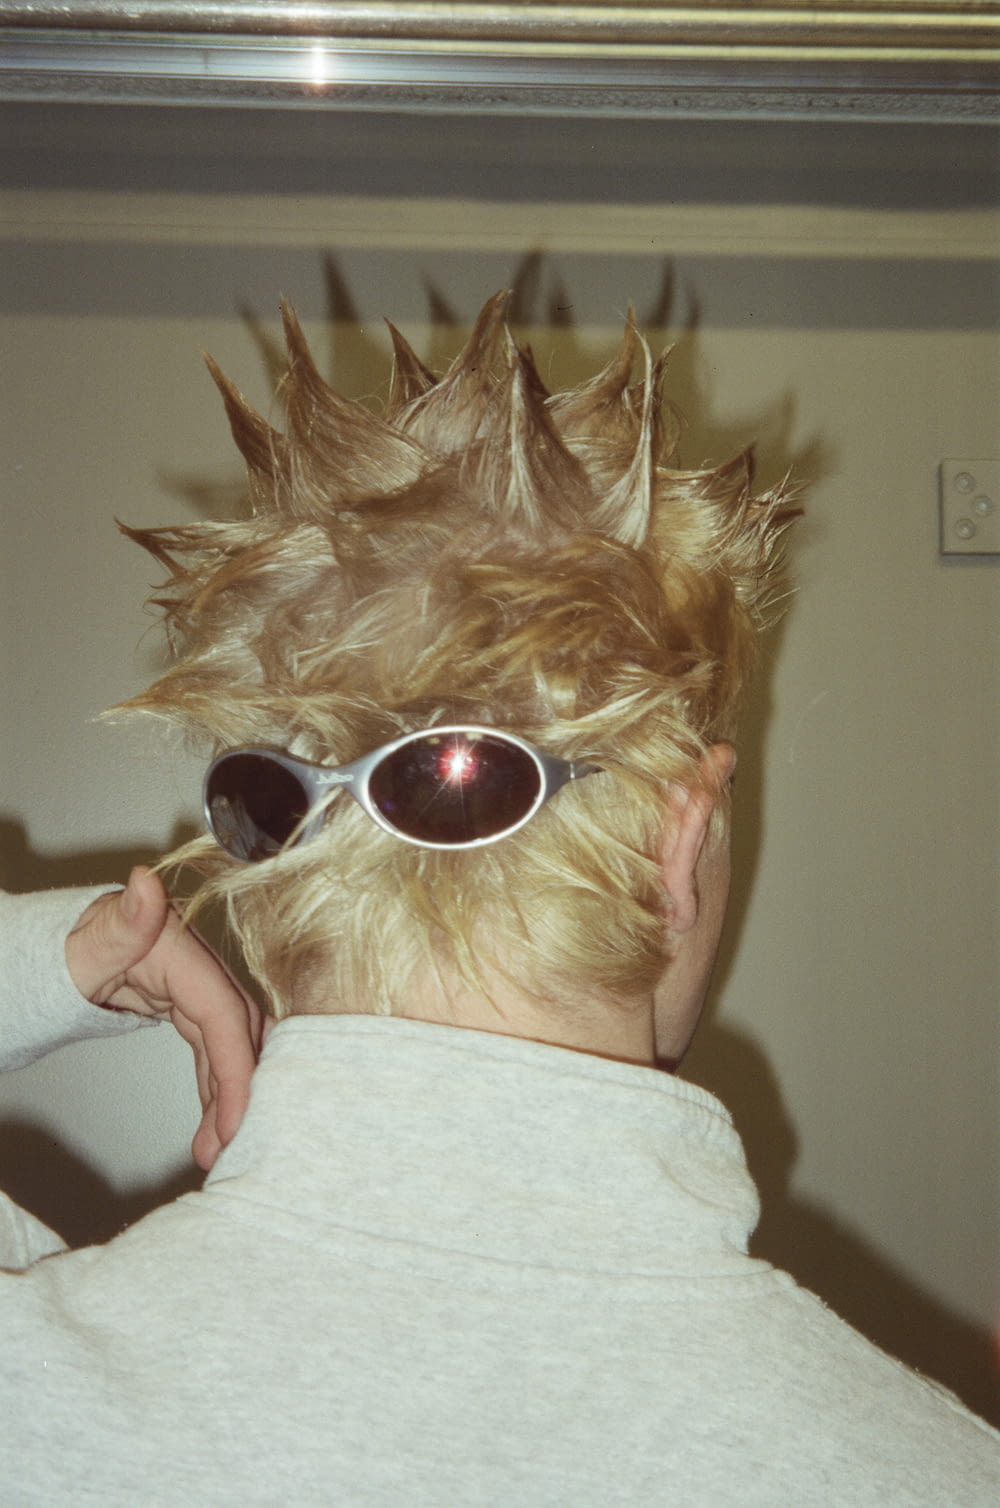 a person with a spiked head and sunglasses